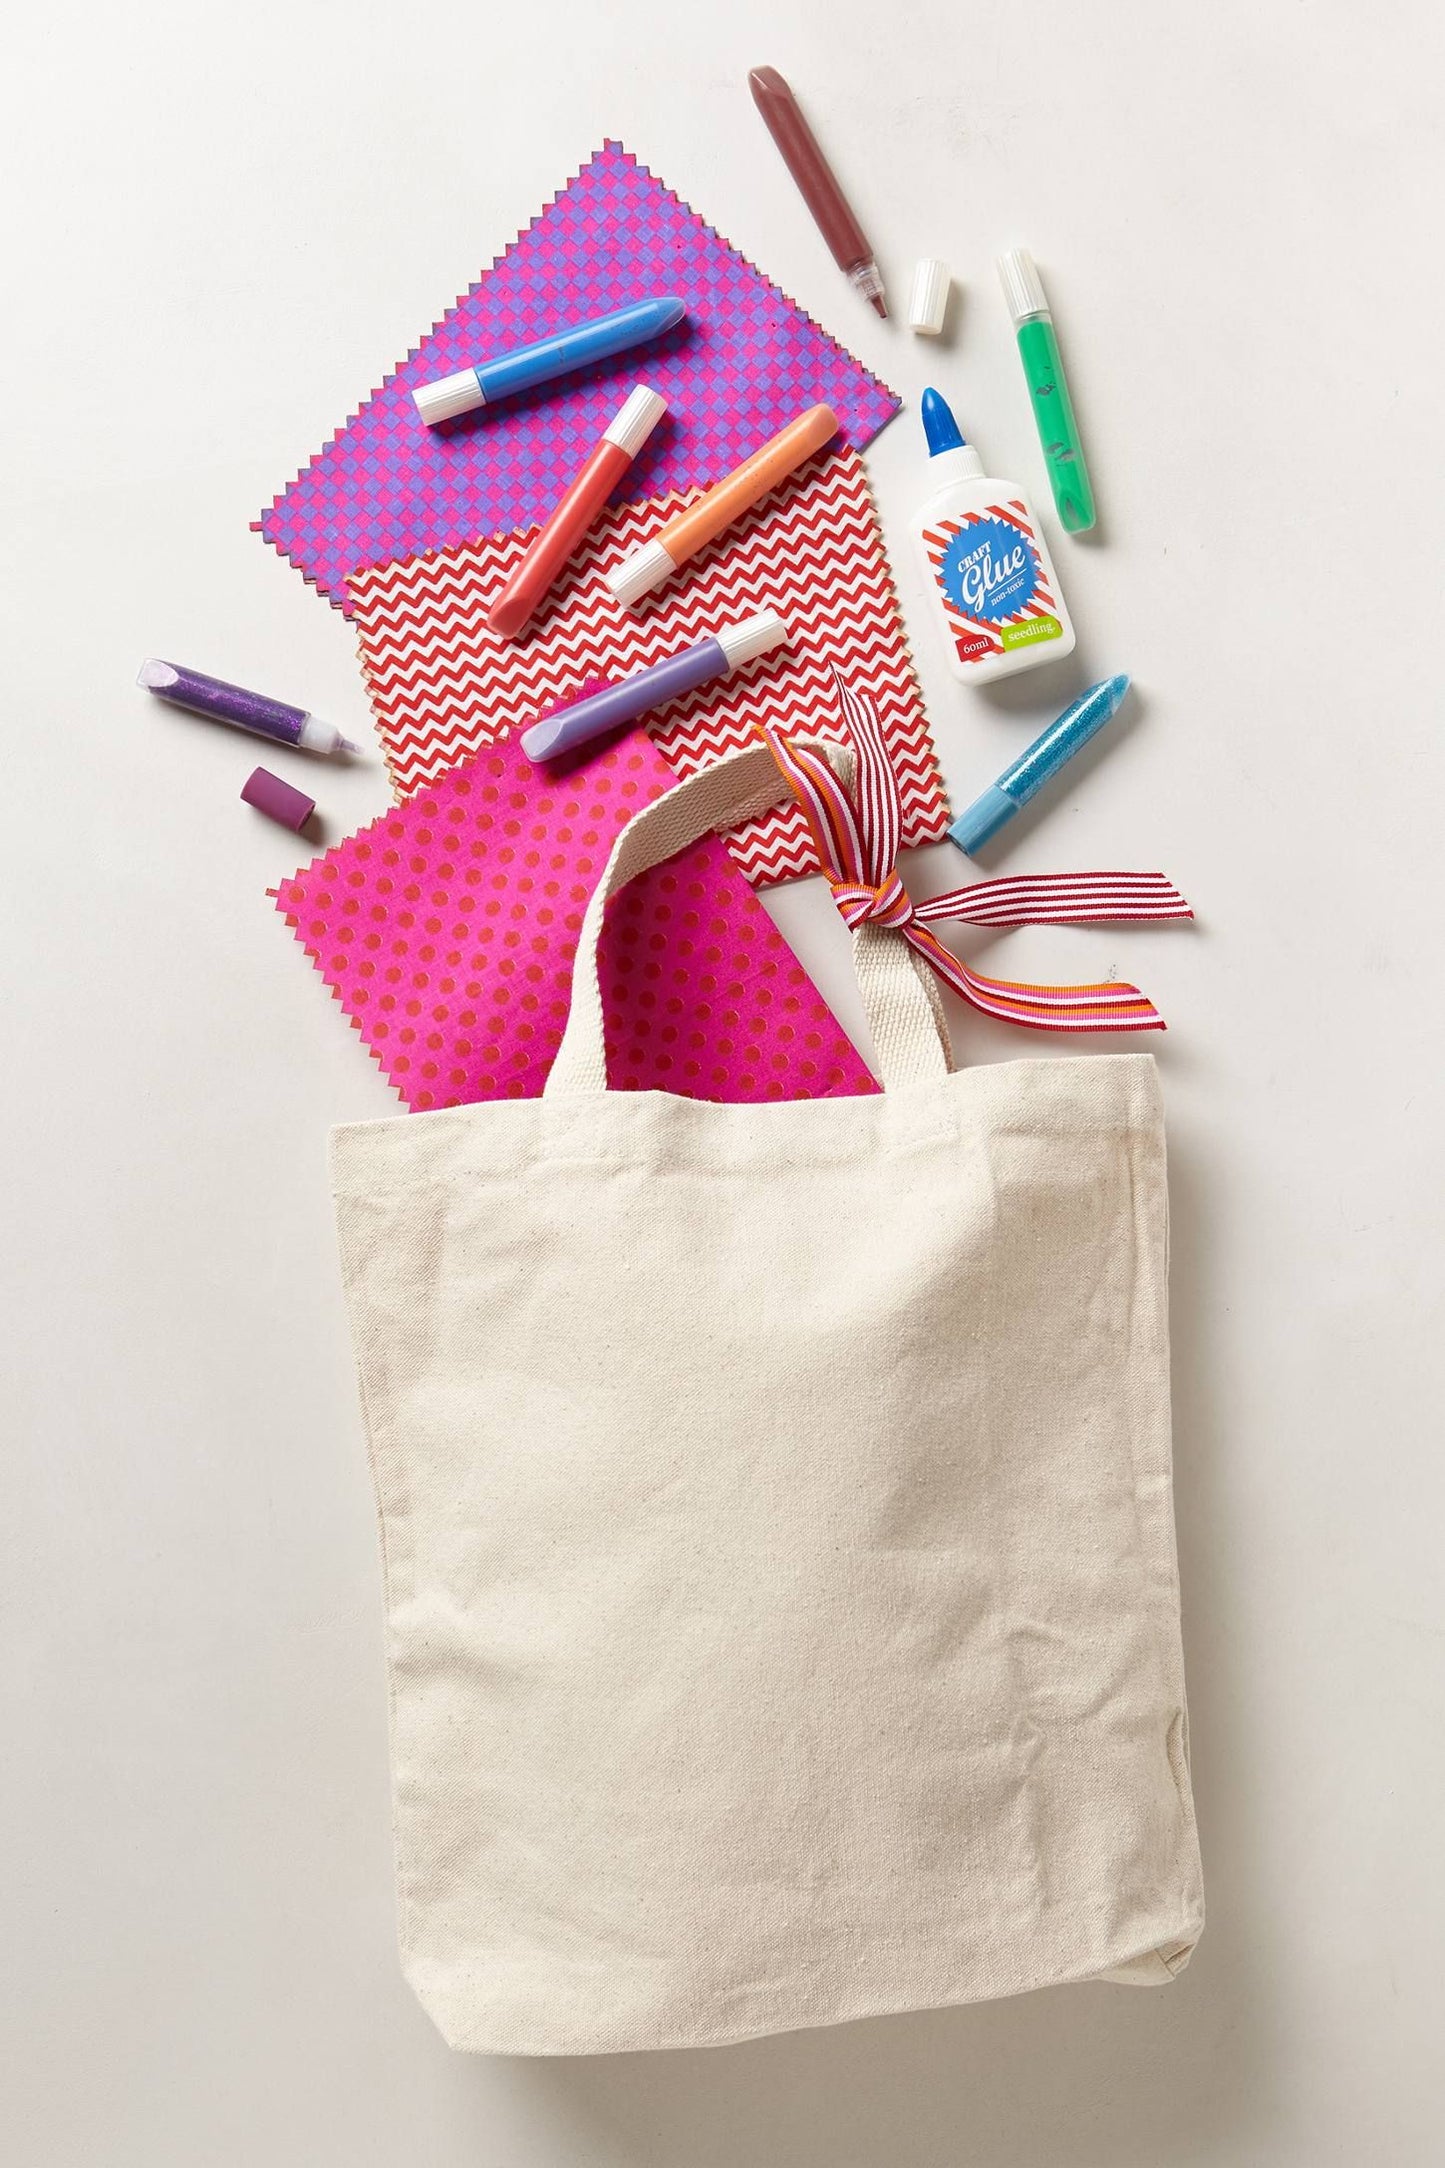 Design Your Own Tote Bag